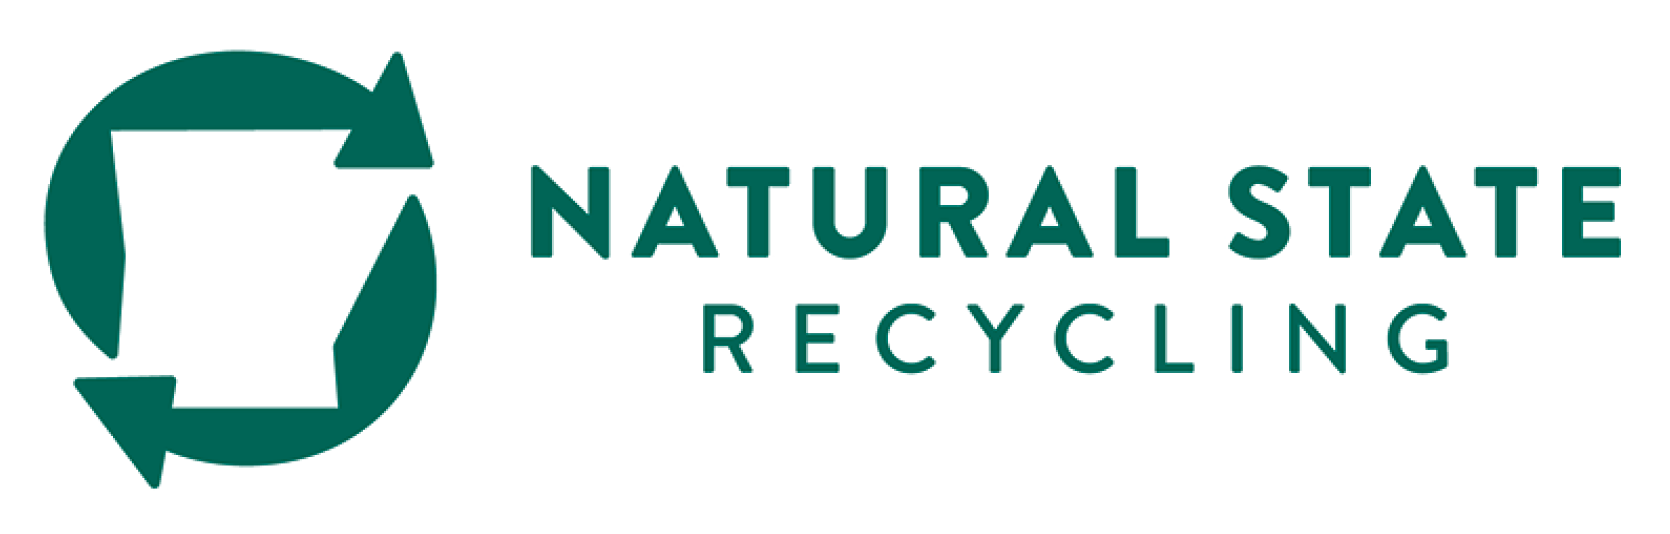 Natural State Recycling Logo